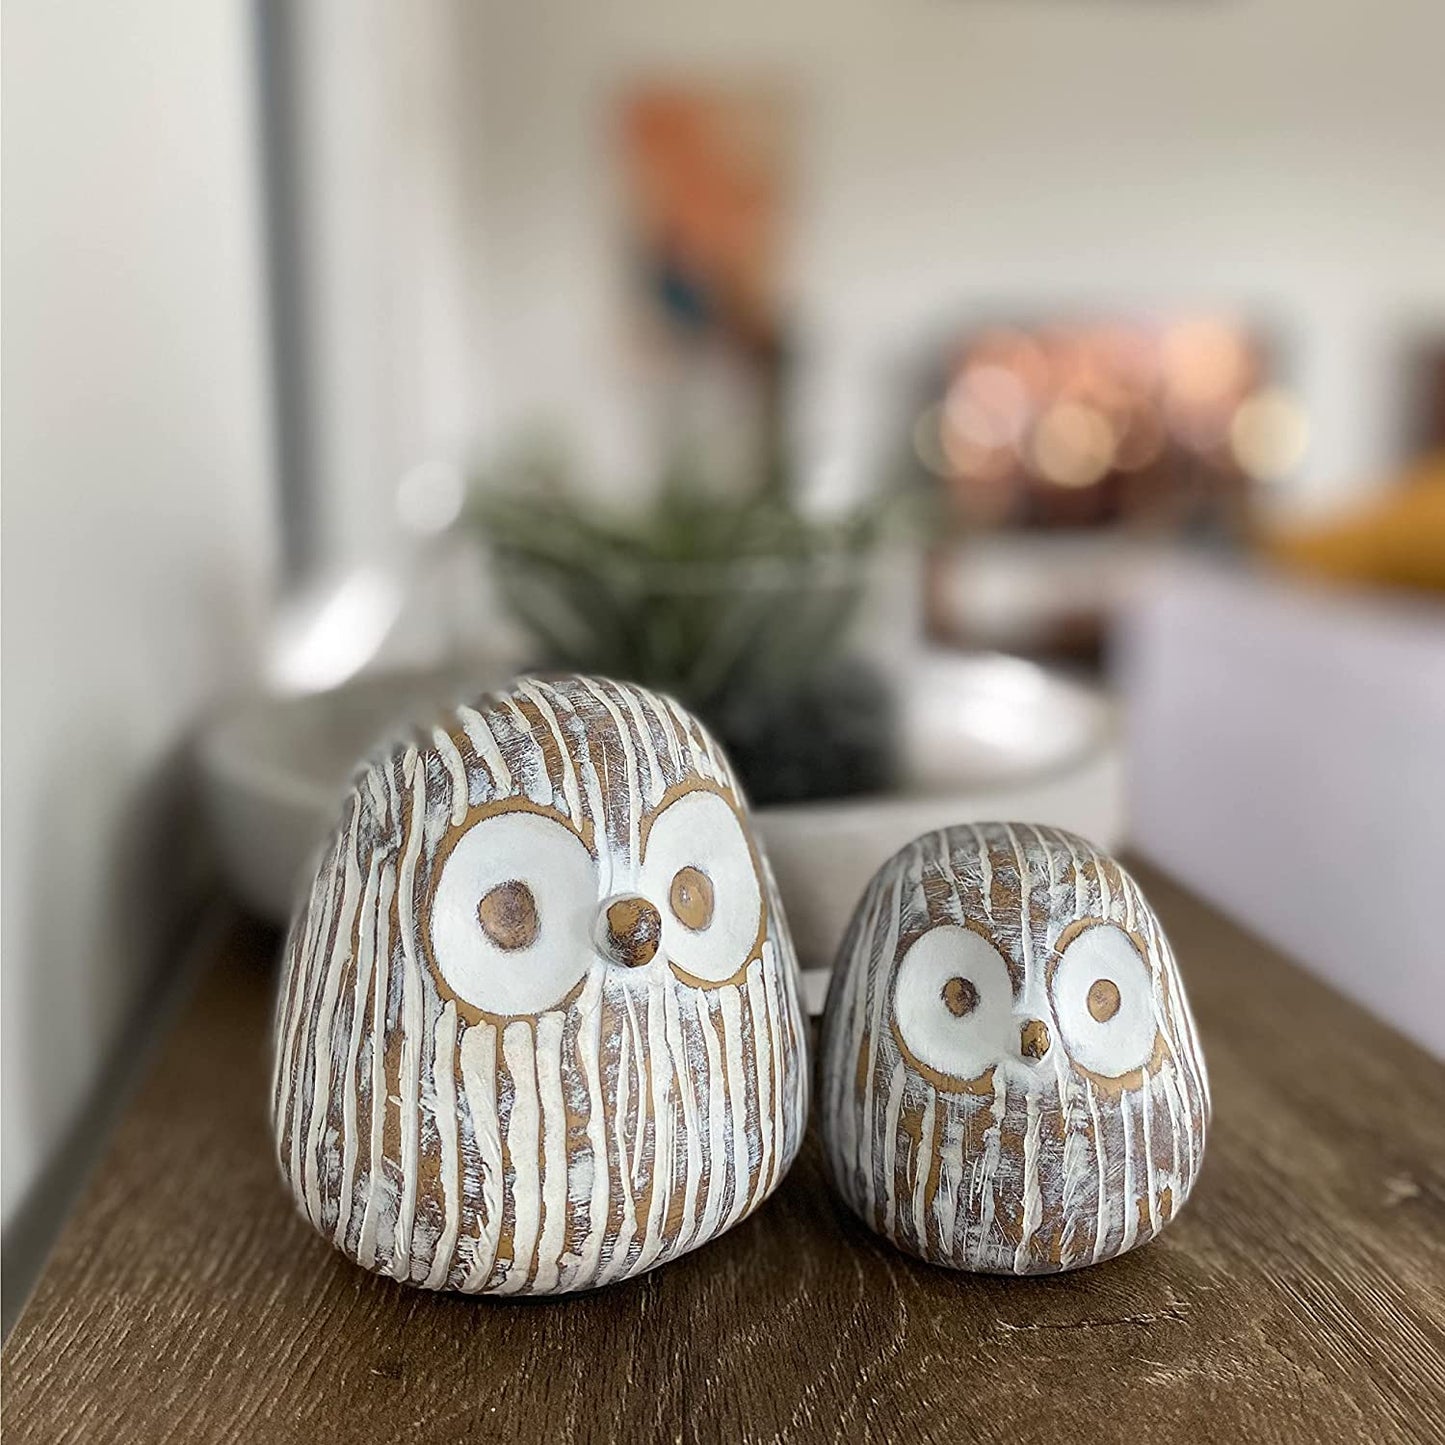 Chubby Night Owl Decor Statue Sculpture, Bookshelf Decor Accents, Boxed Set of 2 Rustic Brown & White (3⅛ & 4⅓ inches) Decorative Resin Figurines